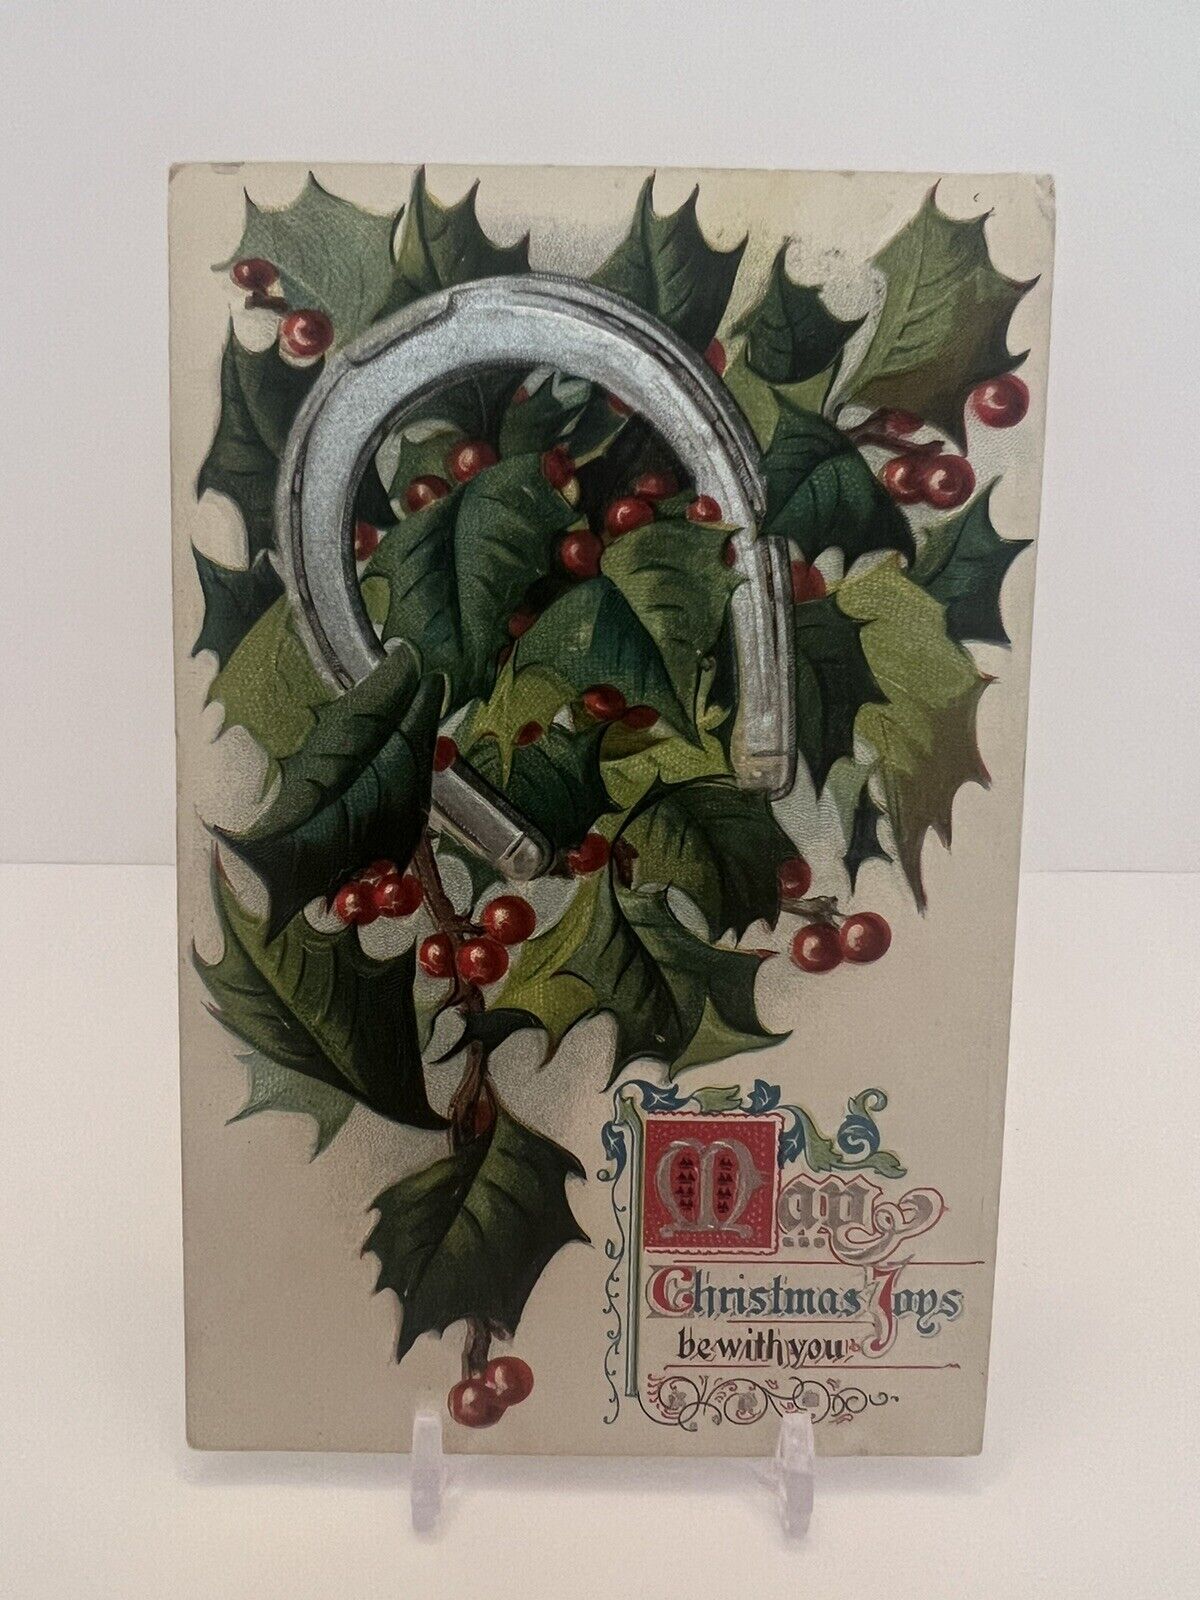 VINTAGE 1909 “Many Christmas Toys Be With You” CHRISTMAS CARD W/ Horse Shoe